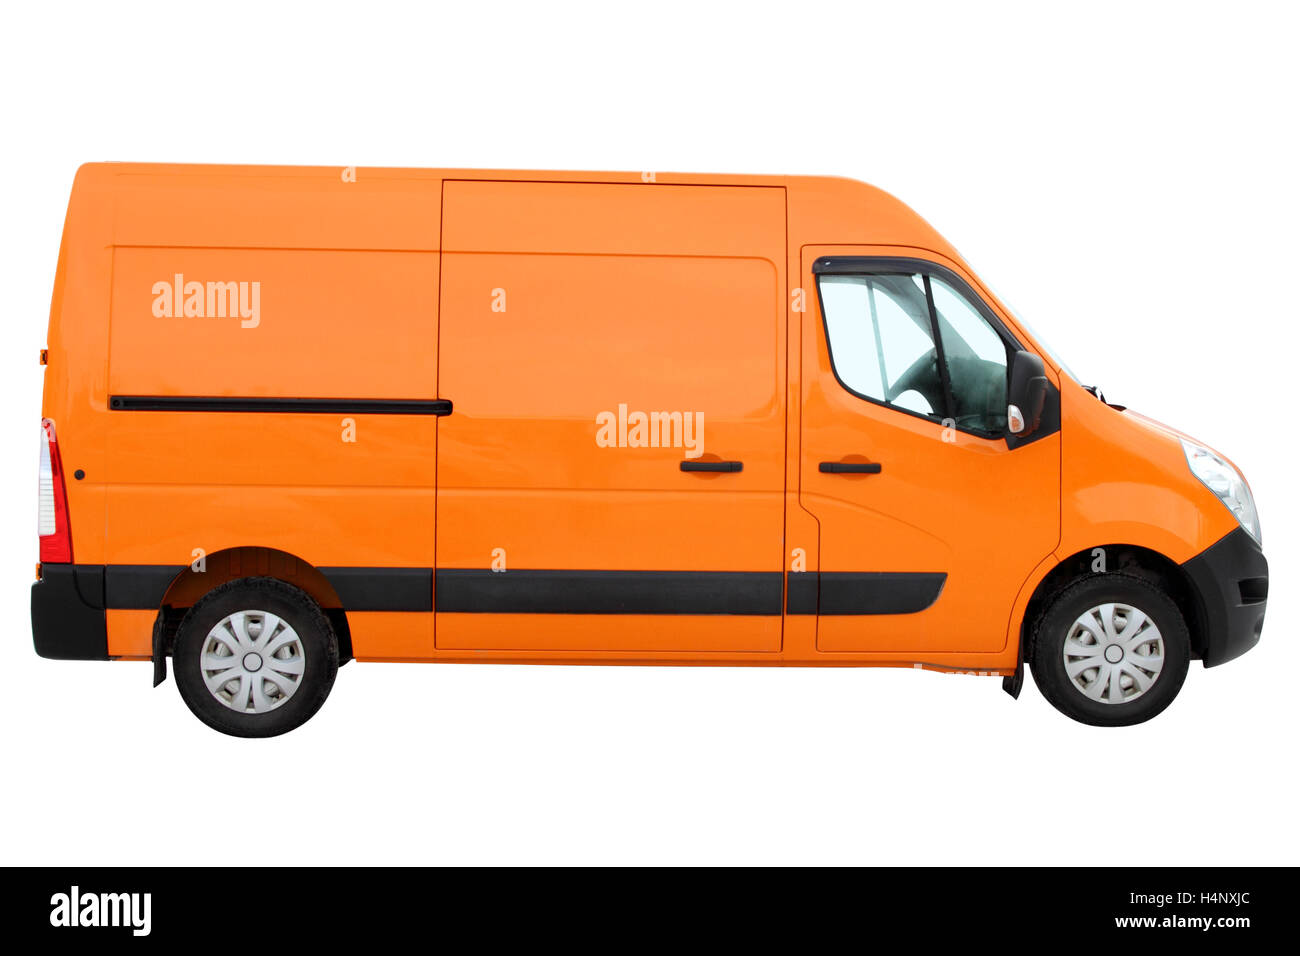 Modern compact van for the transport of goods. Stock Photo